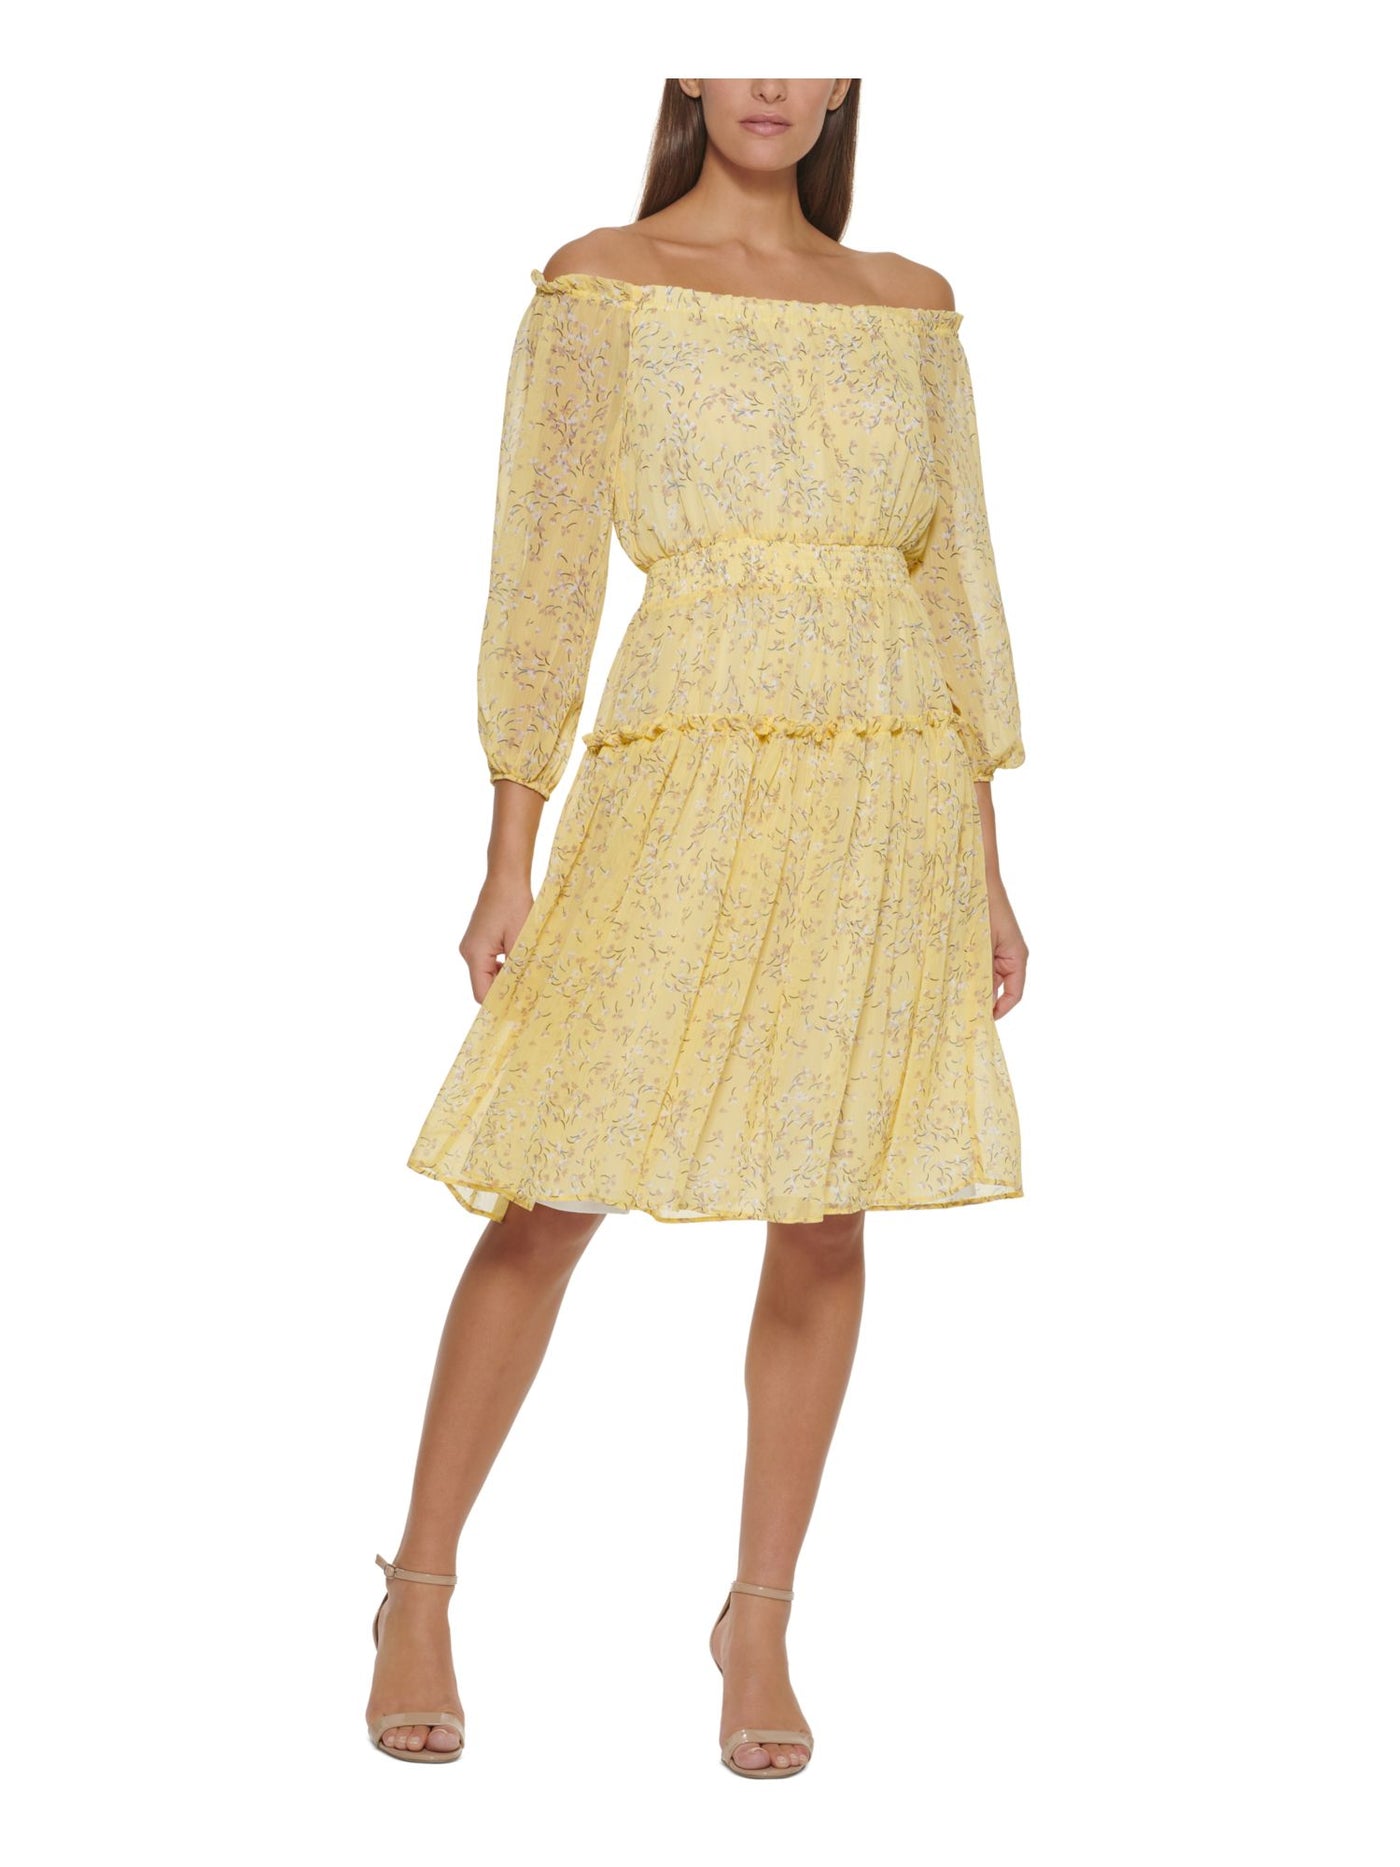 TOMMY HILFIGER Womens Yellow Sheer Ruffled Elasticized Lined Smocked Floral 3/4 Sleeve Off Shoulder Above The Knee Fit + Flare Dress 16